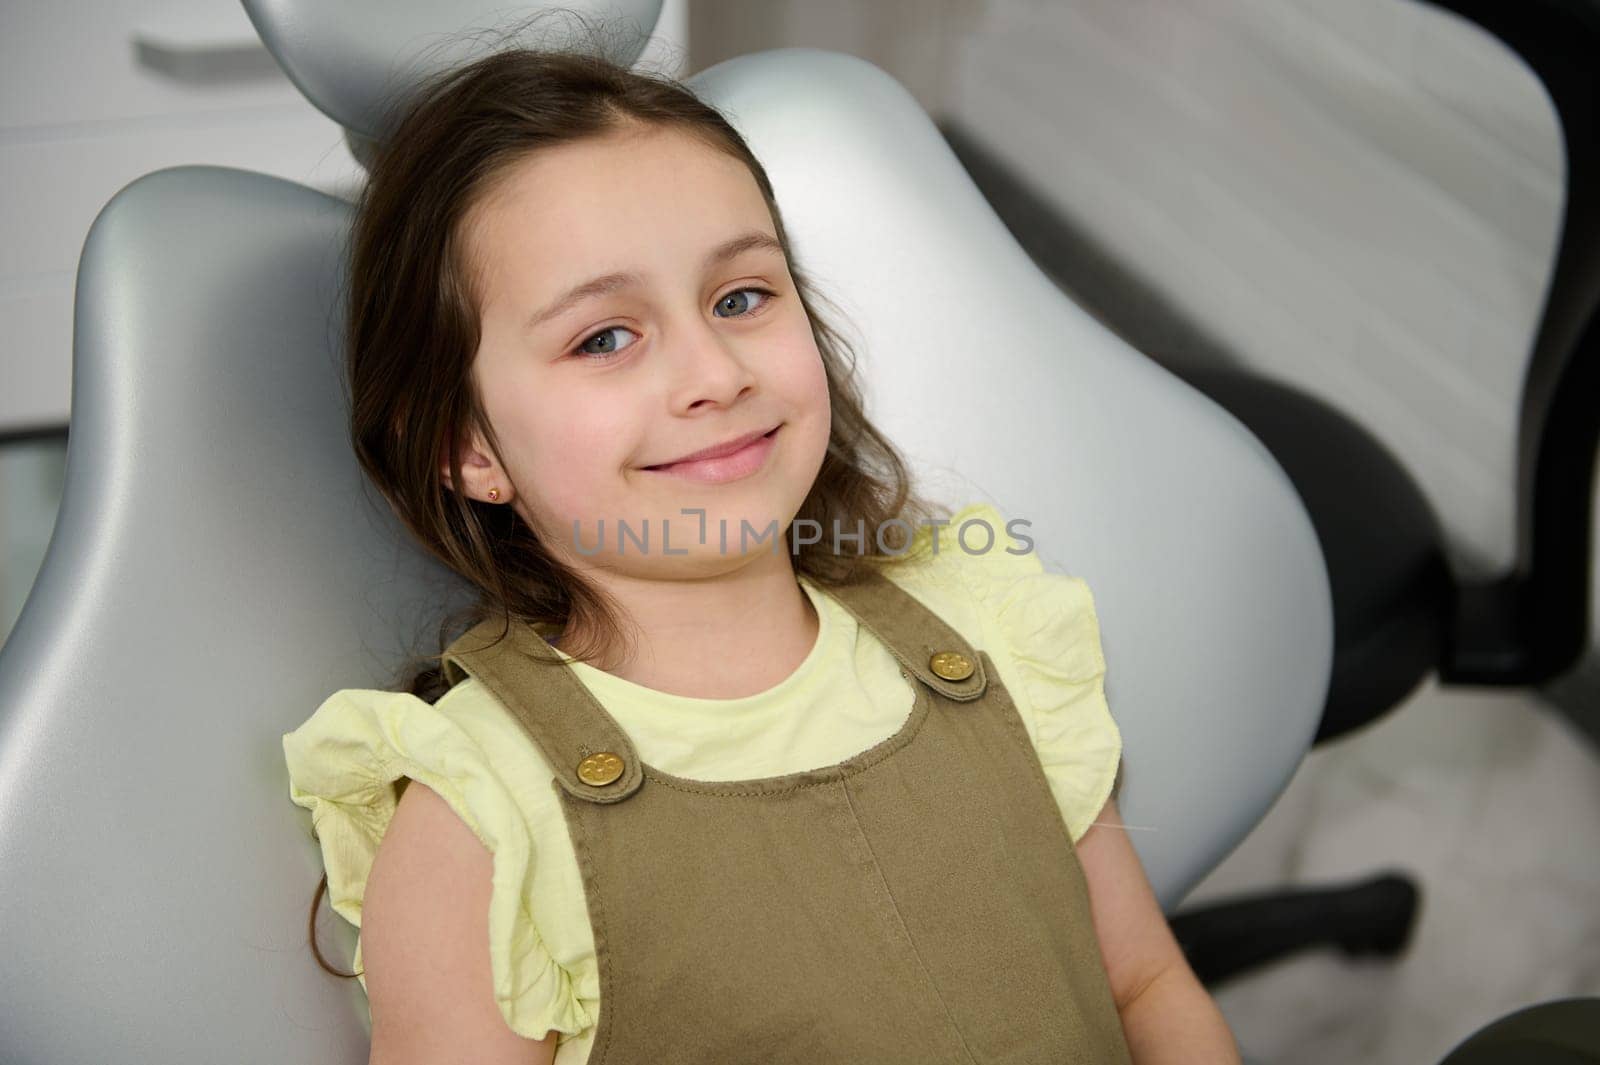 Beautiful kid girl in dentist chair, smiles looking at camera while an appointment in dentistry clinic. Pediatric dental practice. Prophylactic examination of baby teeth to early prevention caries